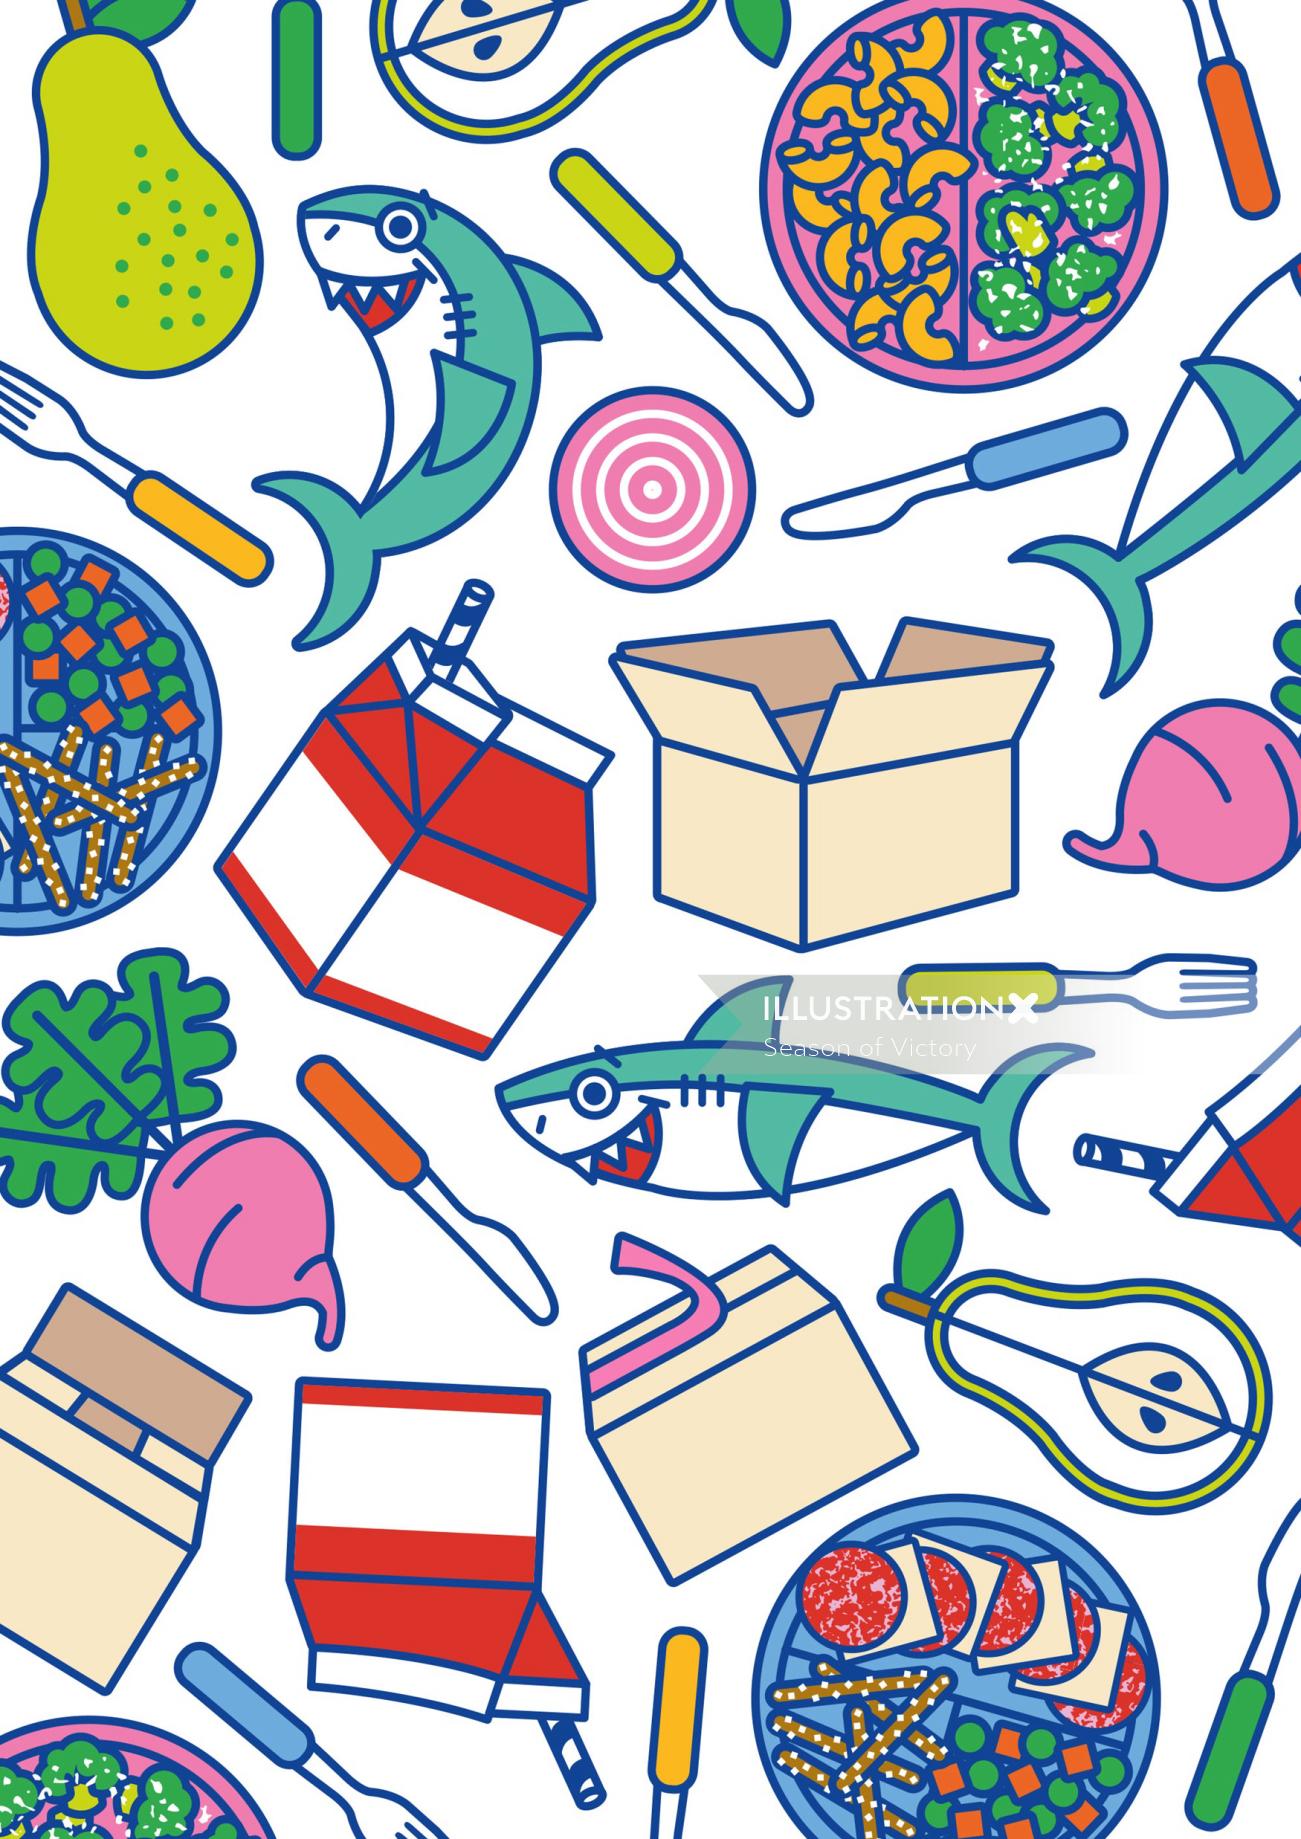 Illustration icons and patterns for a Kids food brand